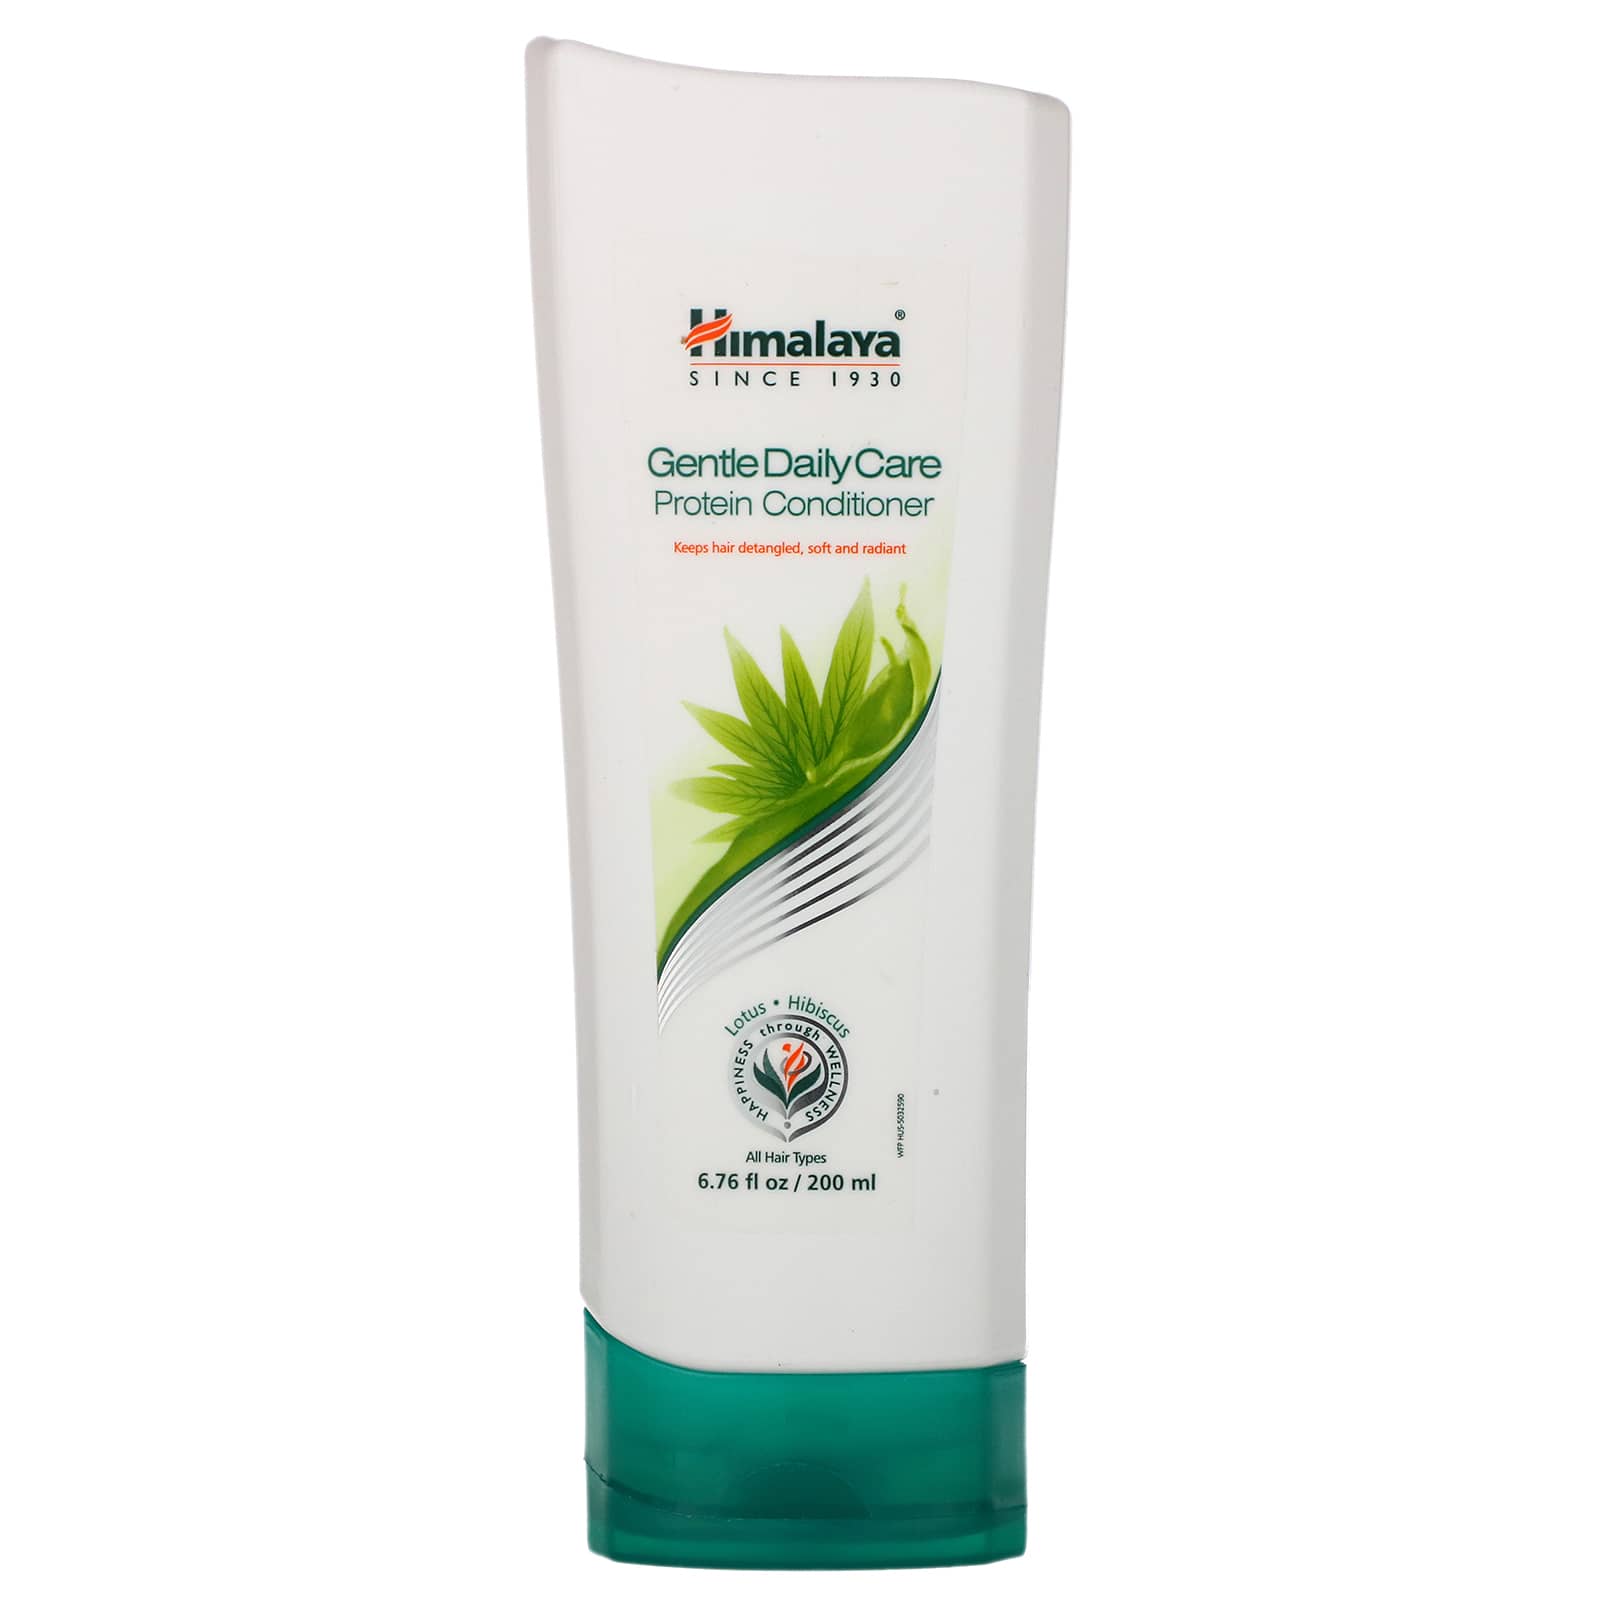 Himalaya, Gentle Daily Care Protein Conditioner, All Hair Types (200 ml)